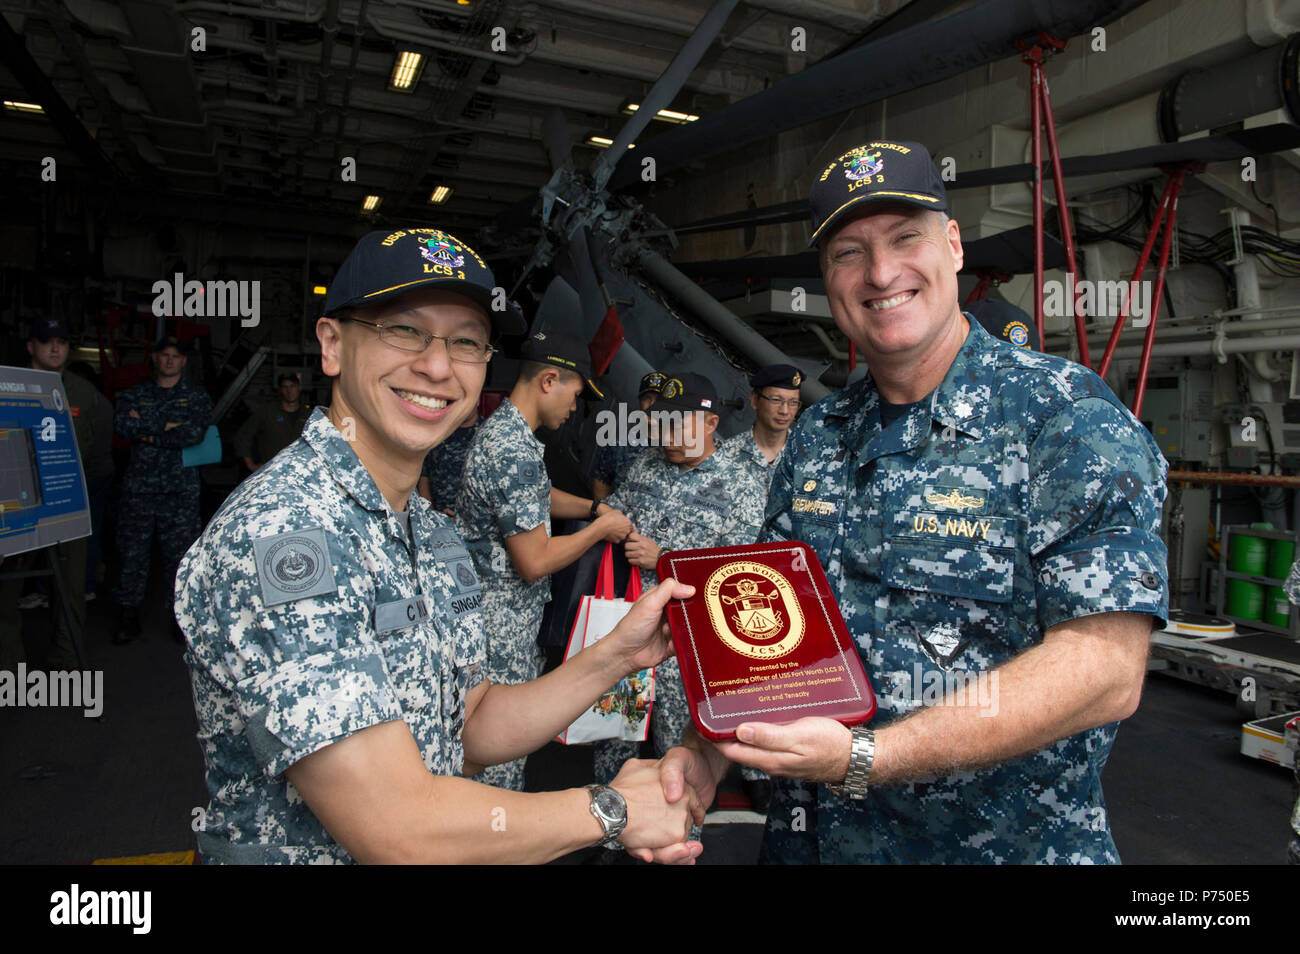 NAVAL BASE, Singapore – (Feb. 9, 2015) – Cmdr. Kendall Bridgewater, commanding officer of LCS Crew 104 presents Rear-Admiral Lai Chung Han, Republic of Singapore Chief of Navy, a token gift after guiding a tour of the littoral combat ship USS Fort Worth (LCS 3) for Lai and his staff. Fort Worth is on a 16-month deployment to the U.S. 7th Fleet area of responsibility in support of the Asia-Pacific rebalance. Stock Photo